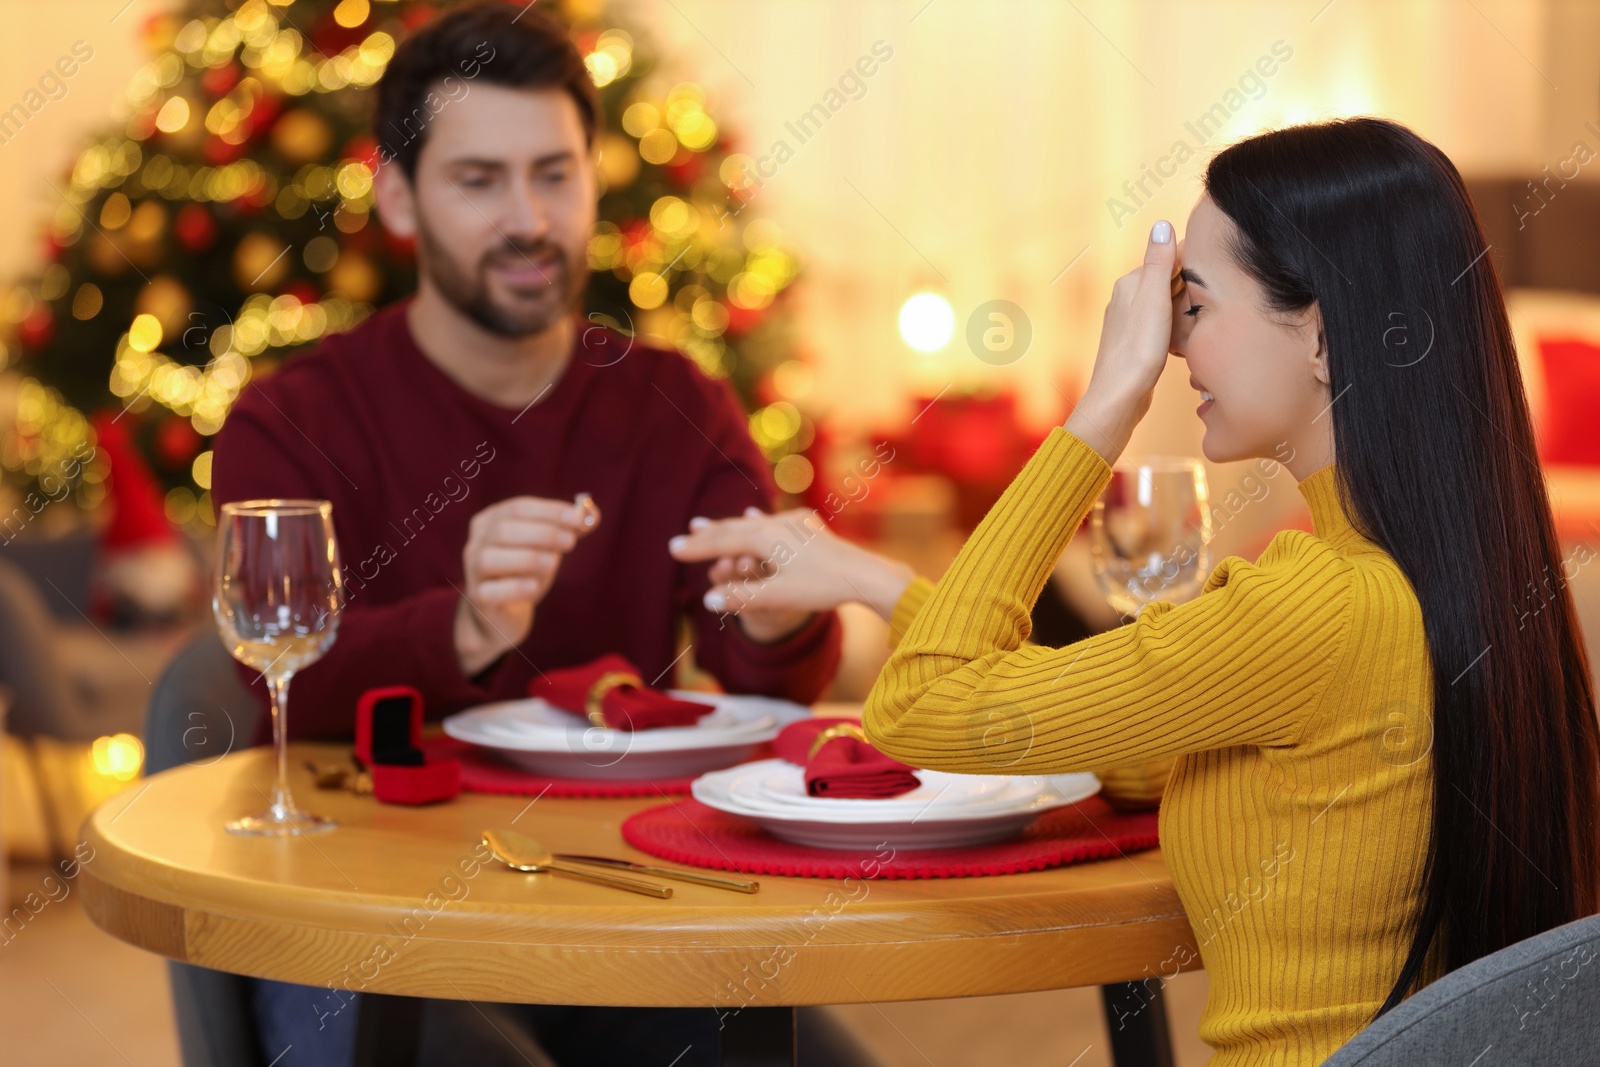 Photo of Making proposal. Man putting engagement ring on his girlfriend's finger at home on Christmas, selective focus